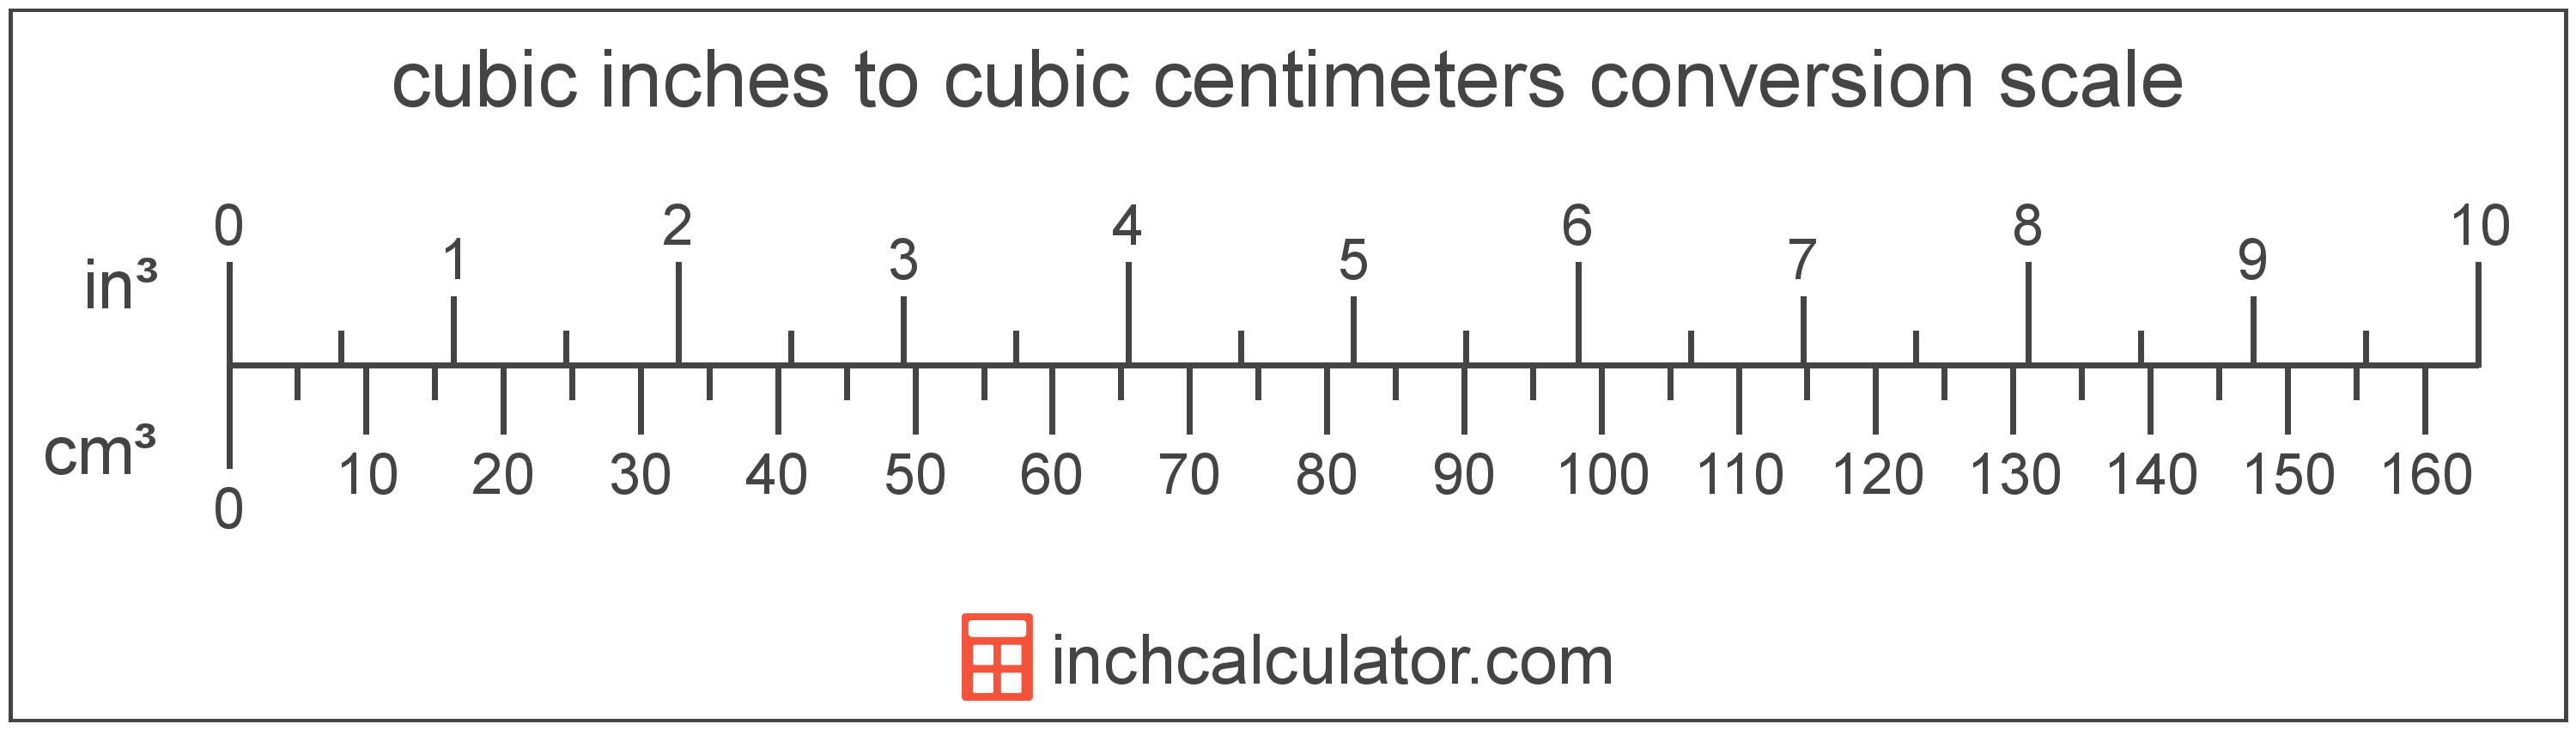 conversion scale showing cubic centimeters and equivalent cubic inches volume values